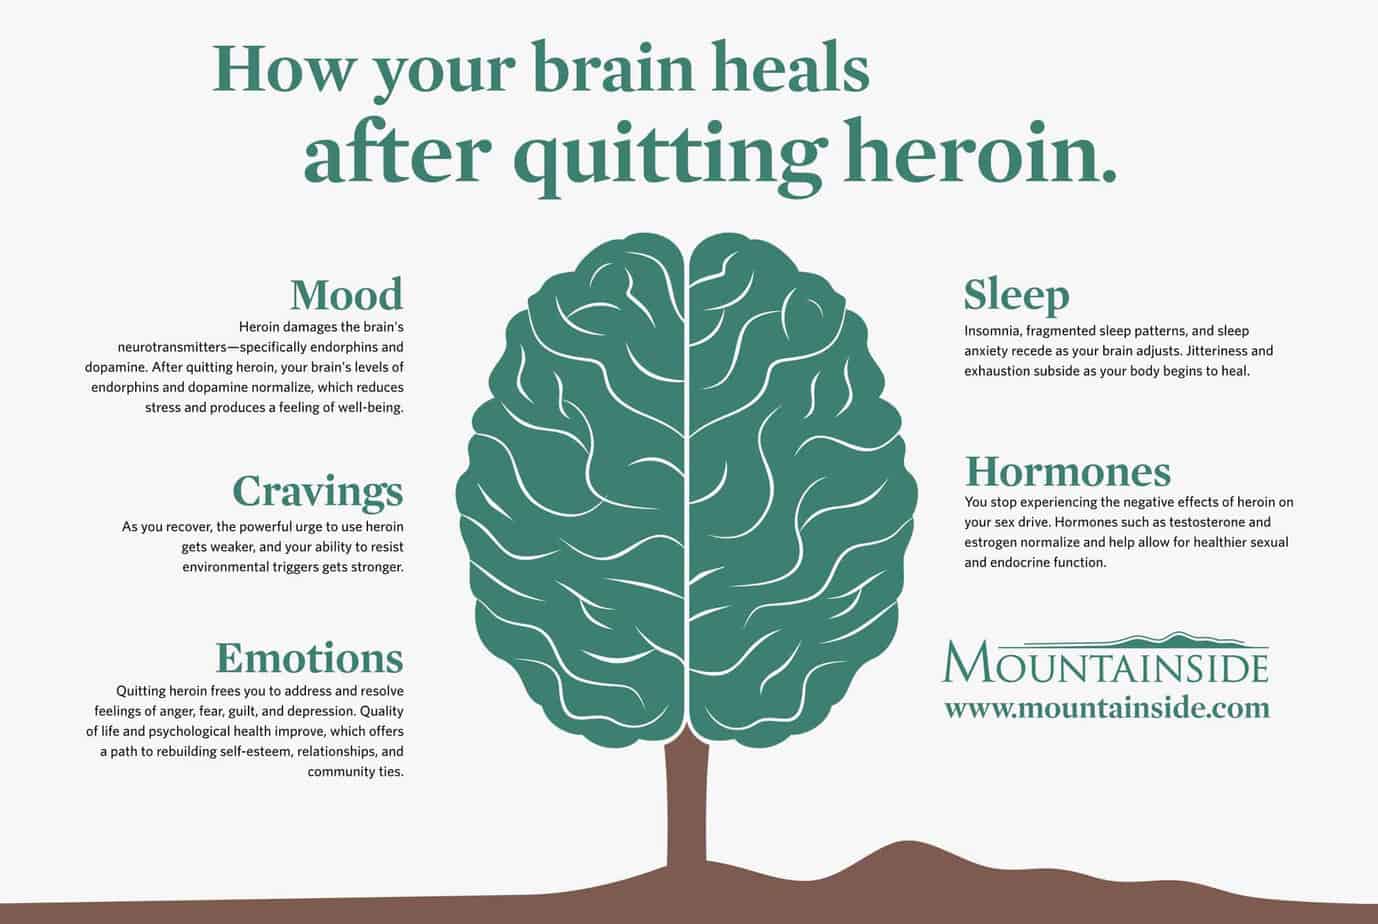 Infographic of brain tree depicting how your brain heals after quitting heroin - mood, cravings, emotions, sleep, hormones